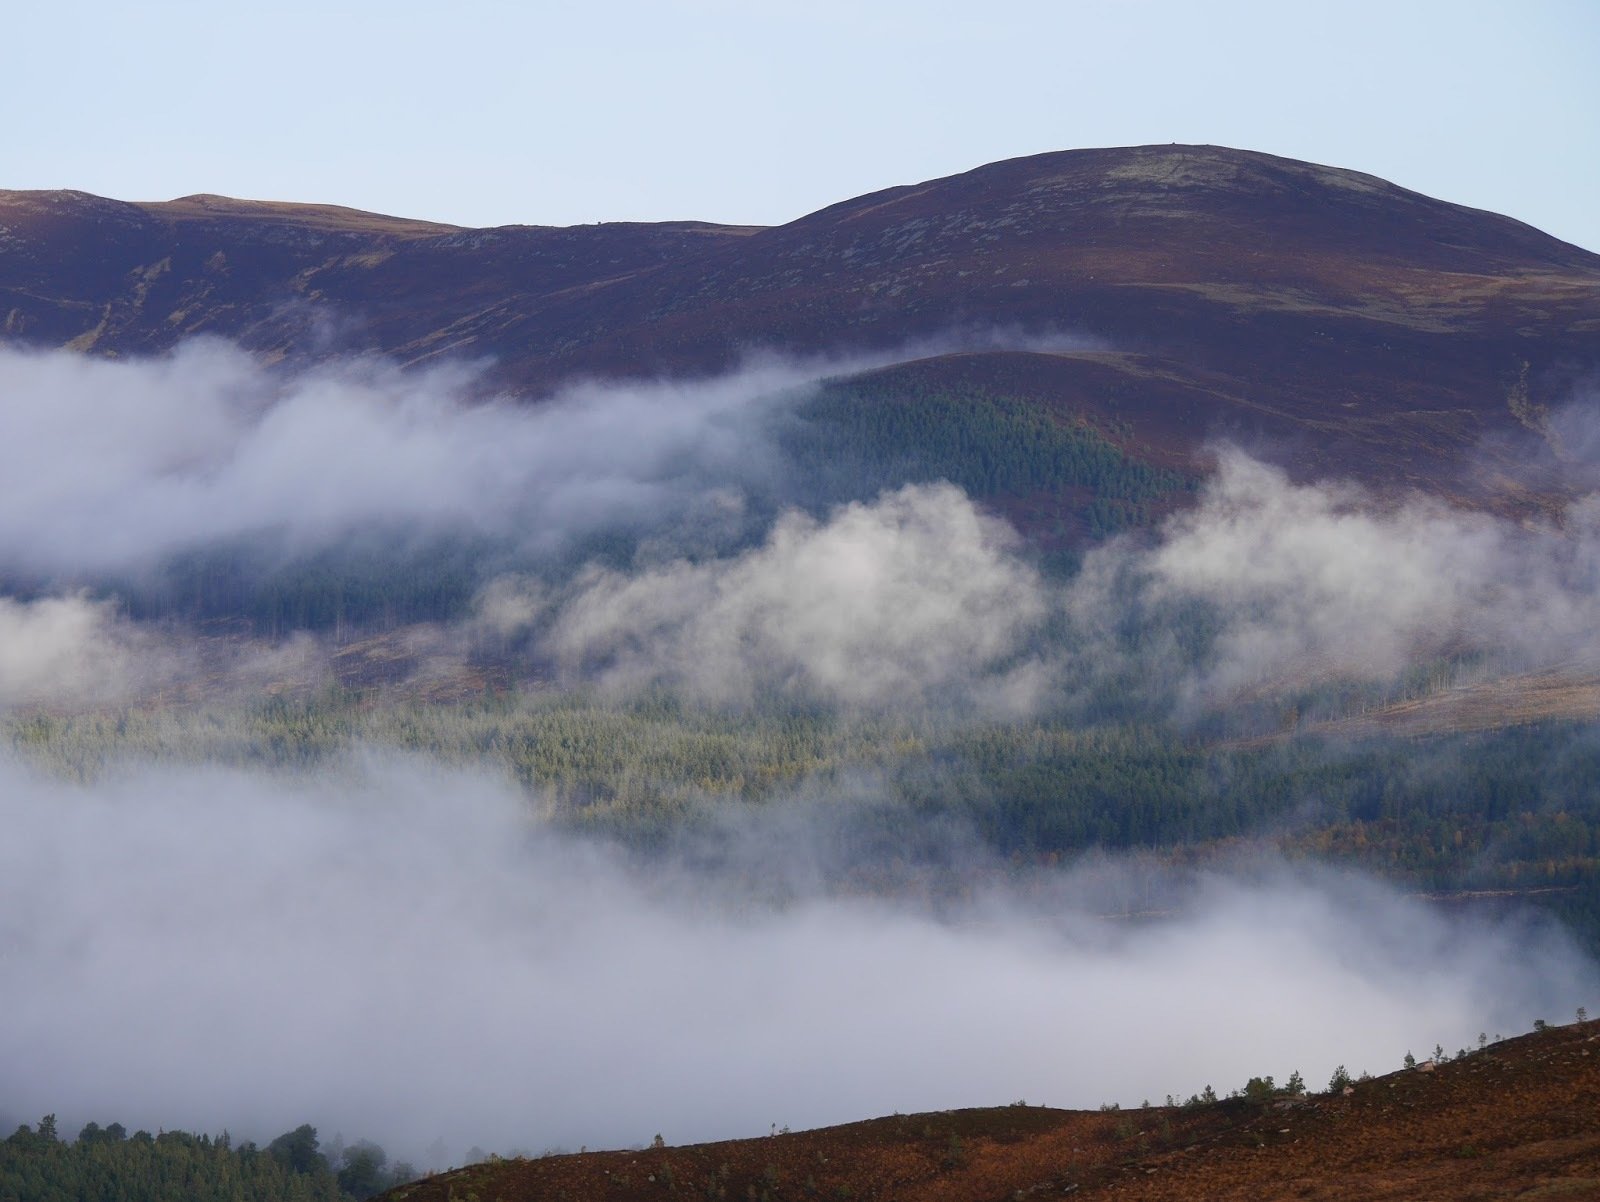 Meall a' Bhuachaille above the clouds